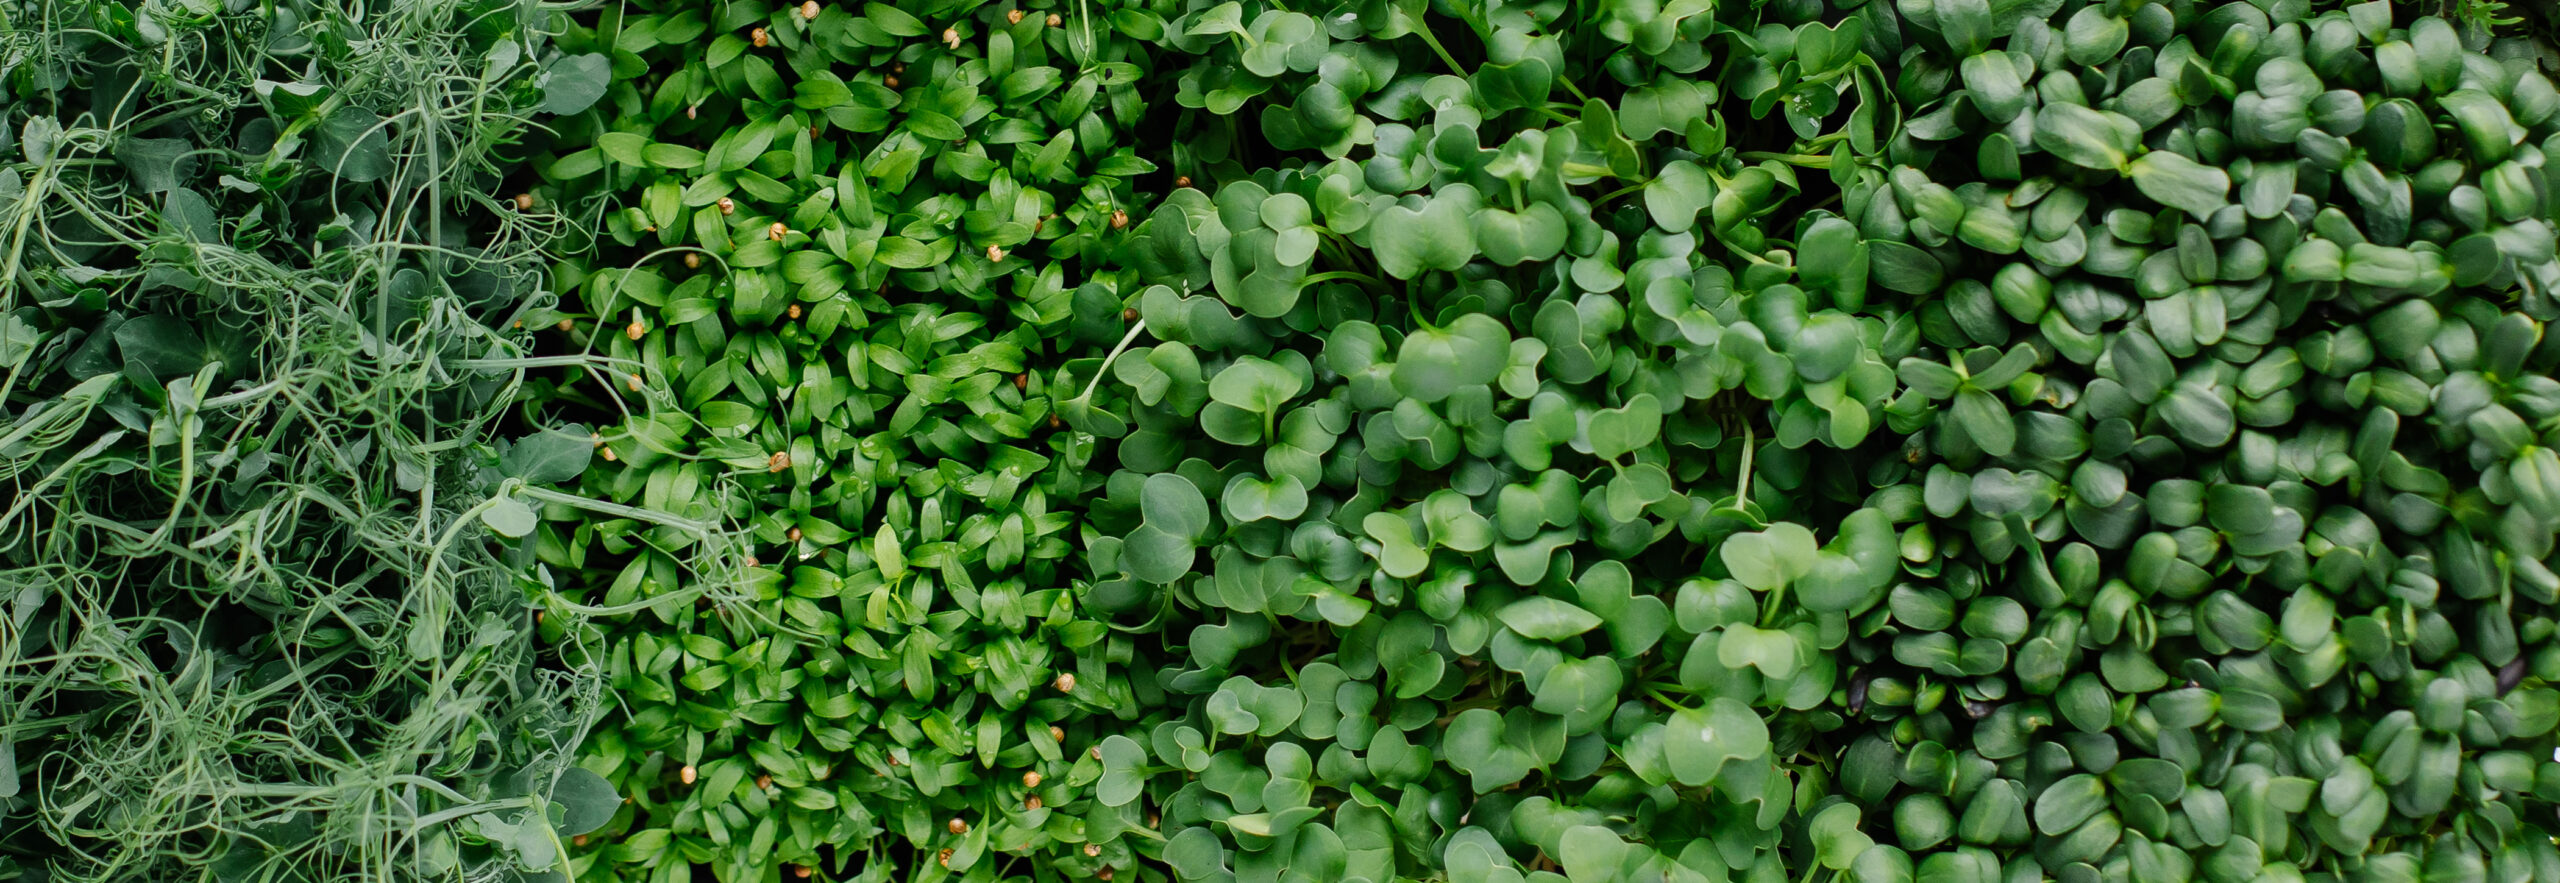 Making the Case for Microgreens